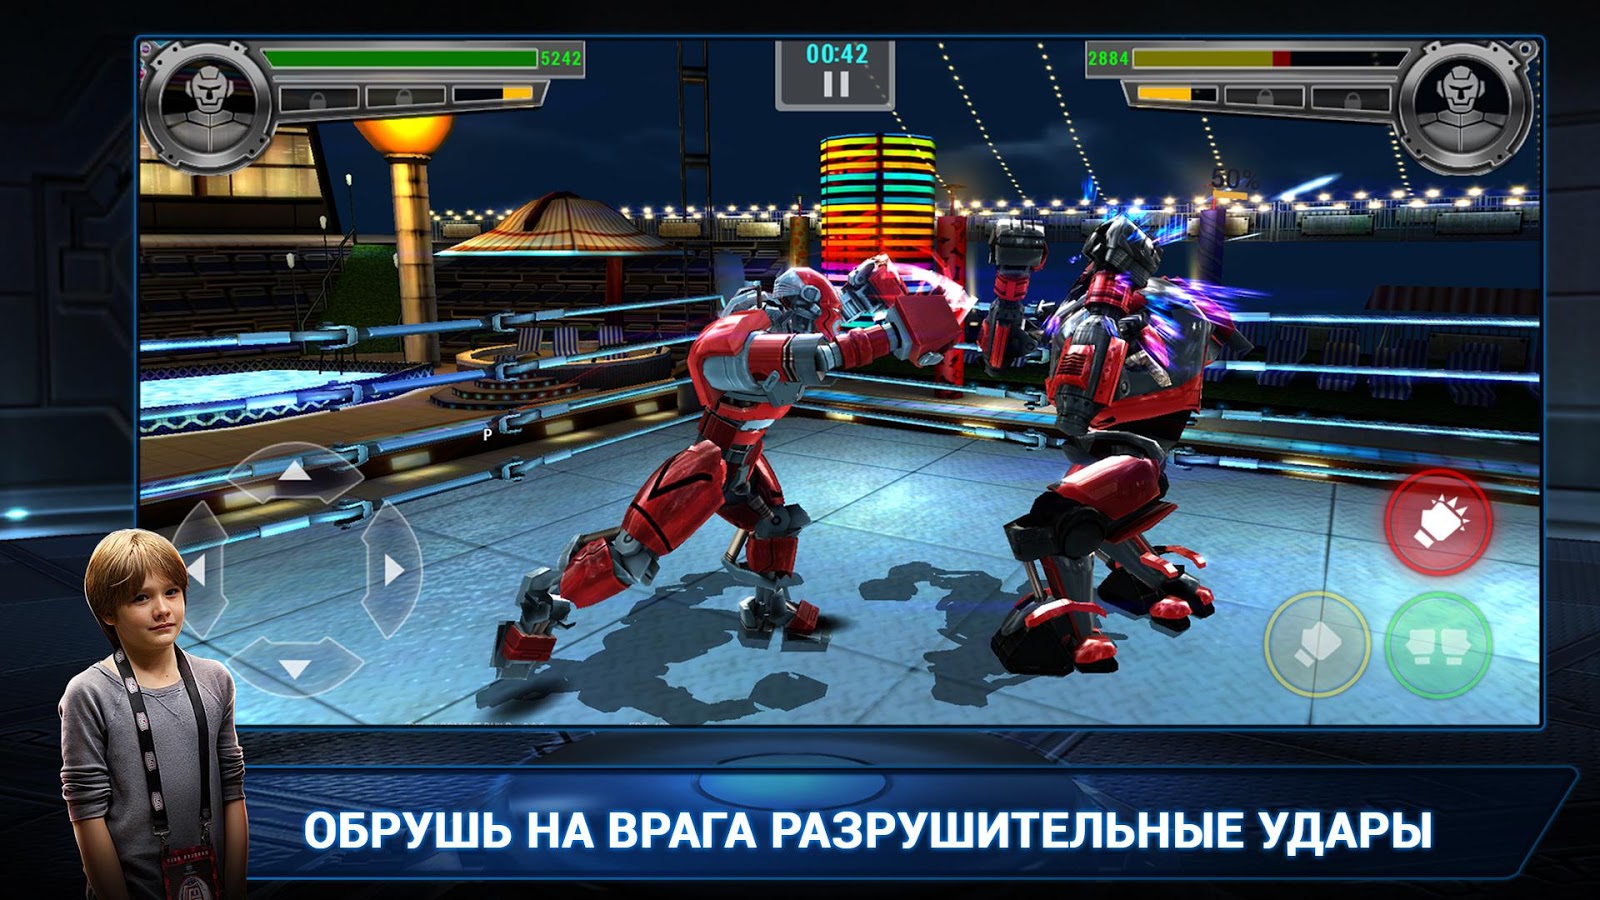 Go real game. Real Steel игра на ps2. Real Steel 2011 игра. Живая сталь игра роботы. Игра Живая сталь 2015.